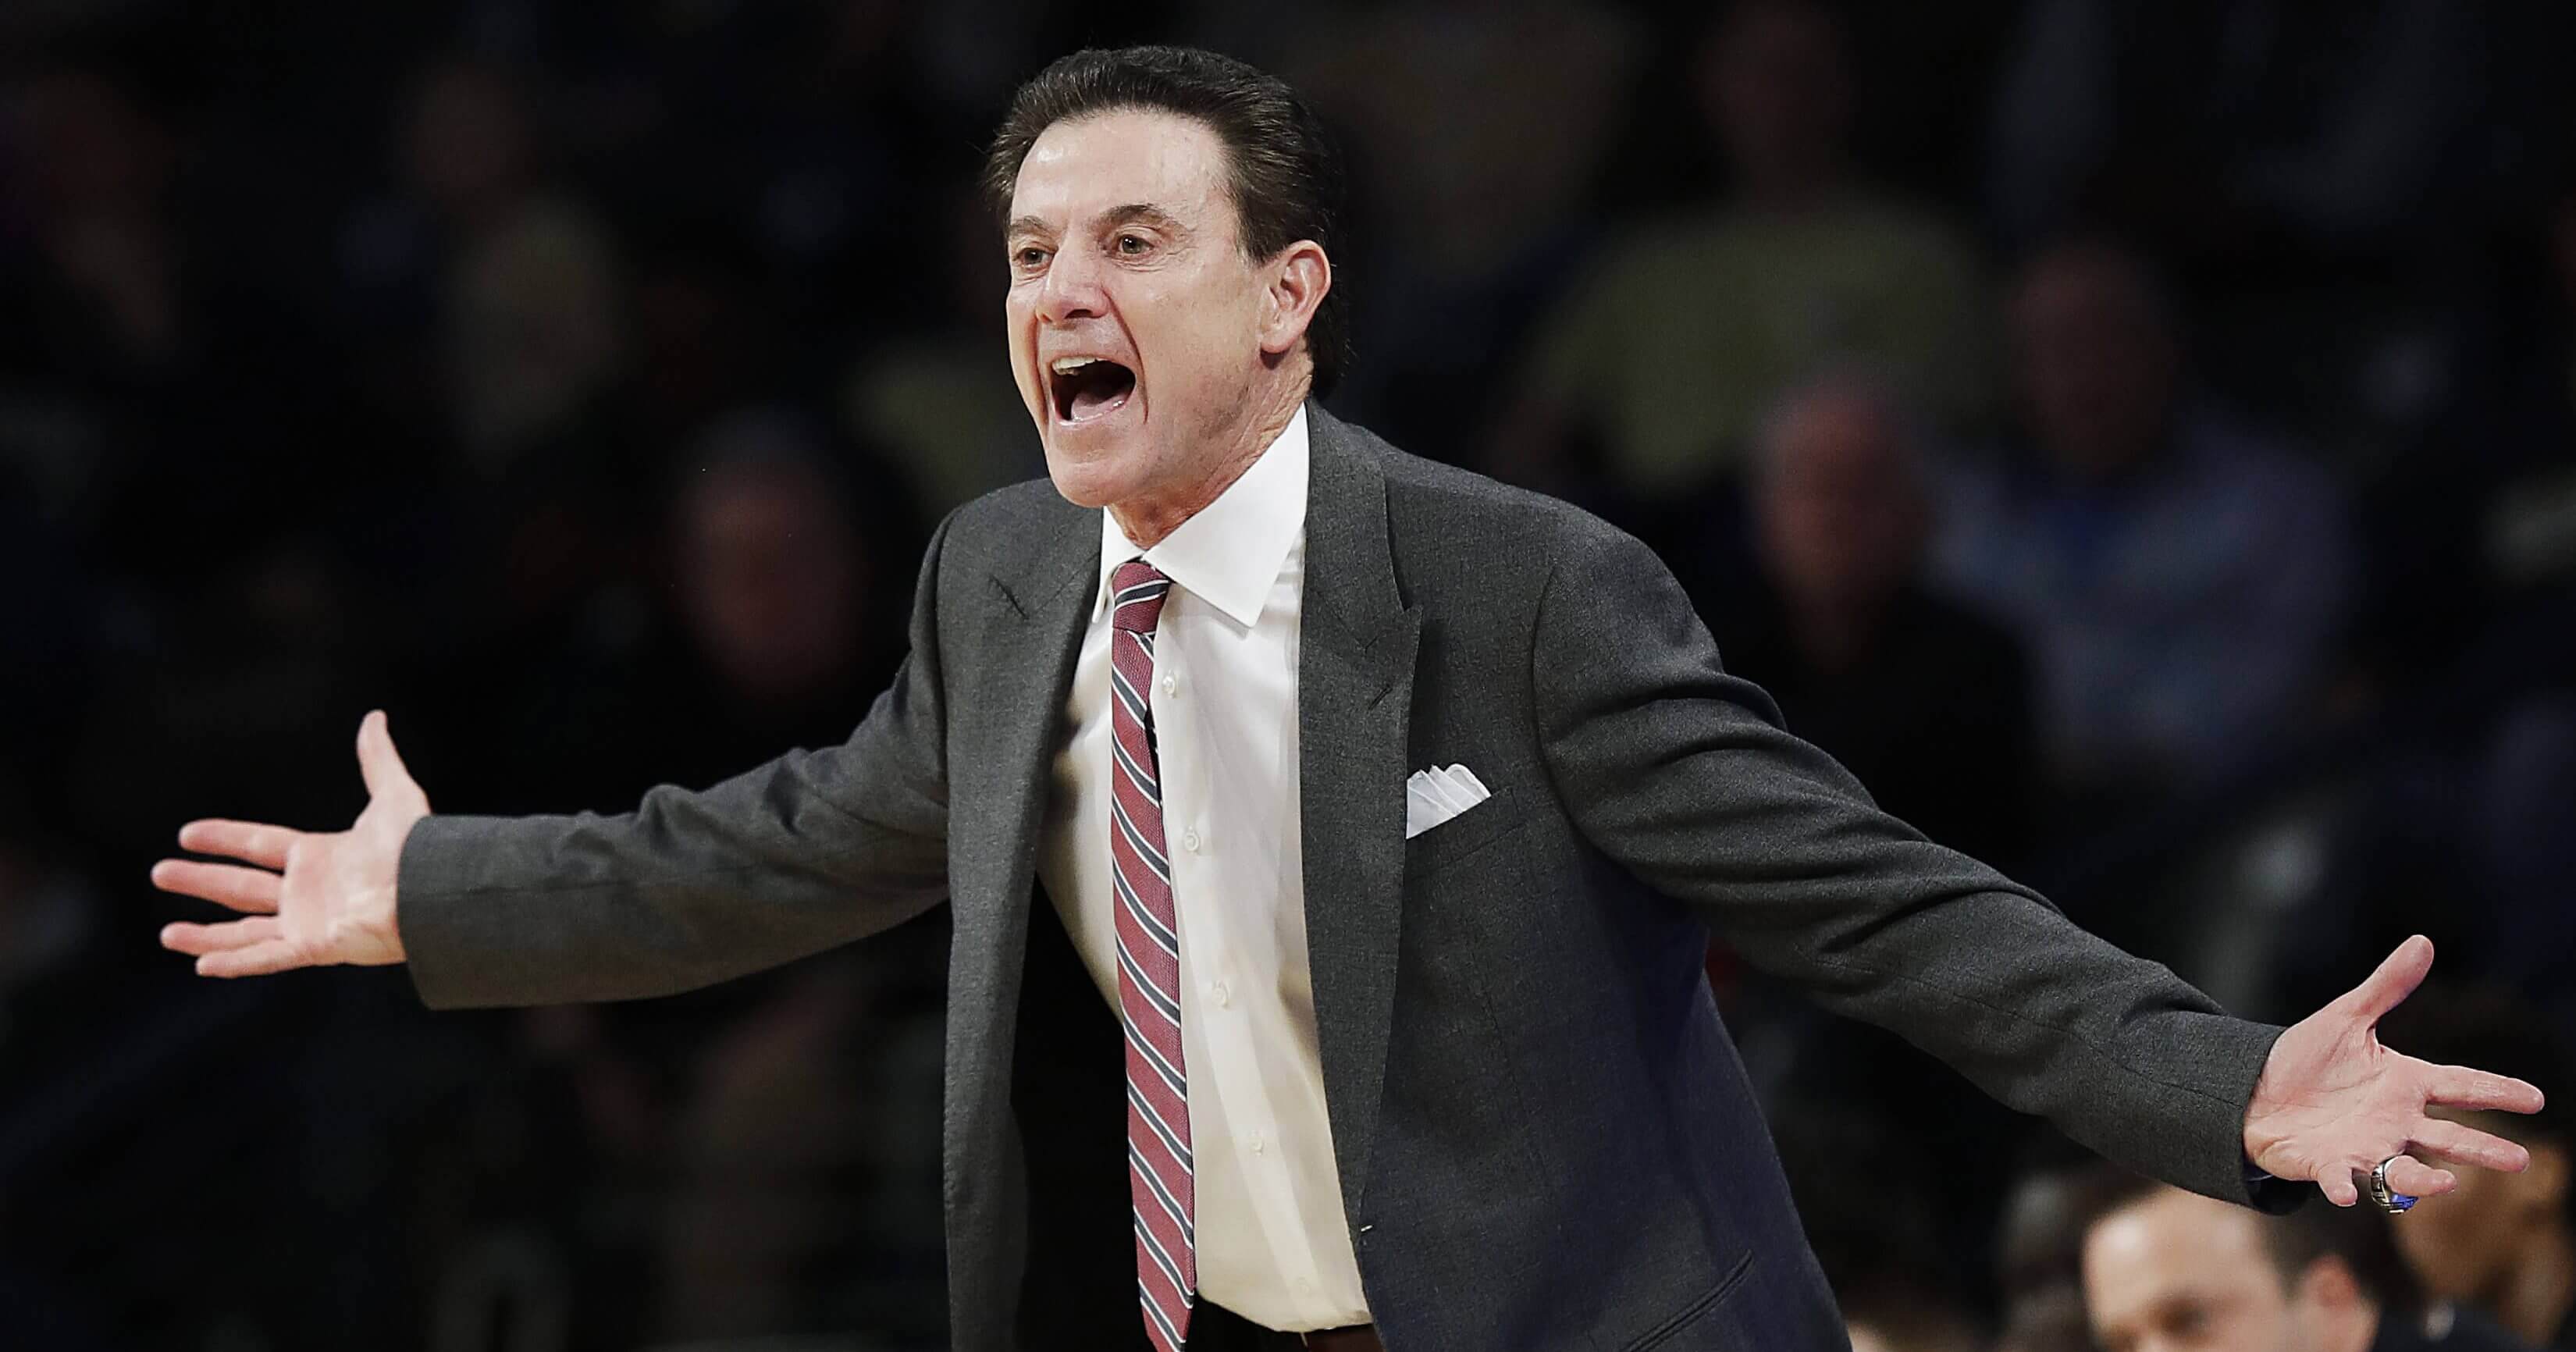 Rick Pitino, then Louisville basketball coach, reacts on the sideline during a 2017 game against Georgia Tech in Atlanta.